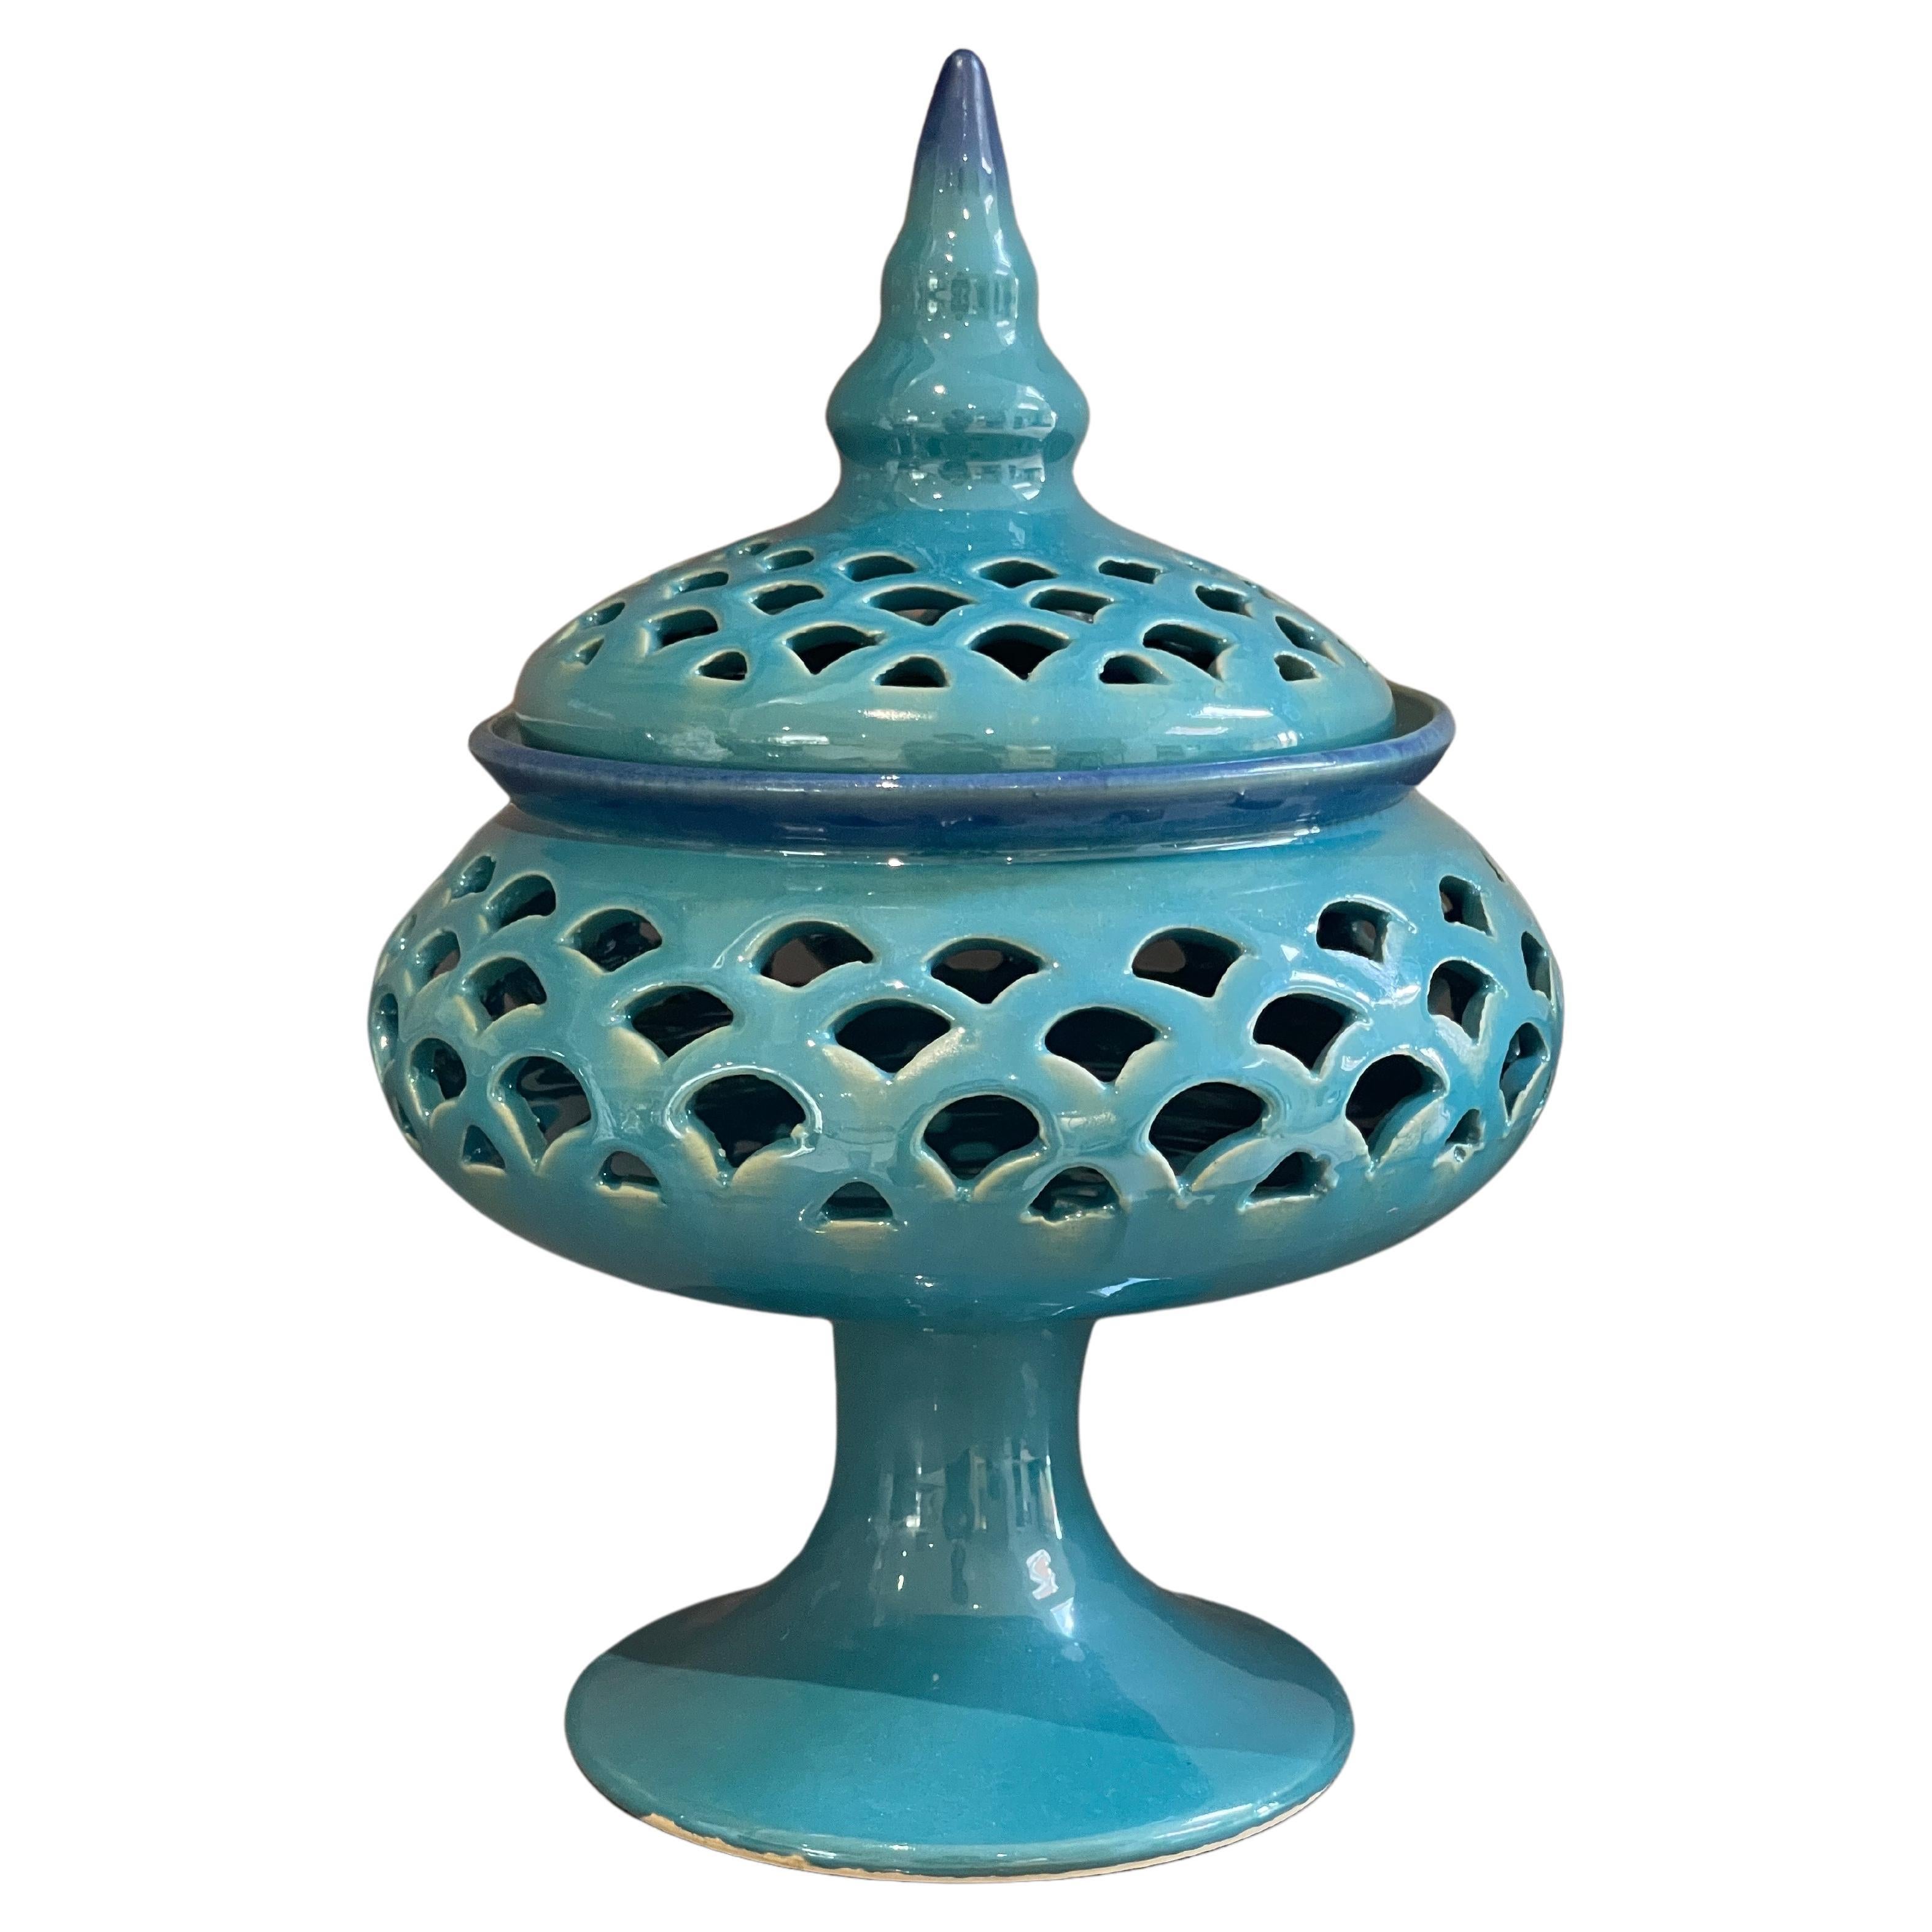 Modern Candle Holder Hand Crafted Blue Ceramic Torches With Stand &Lid